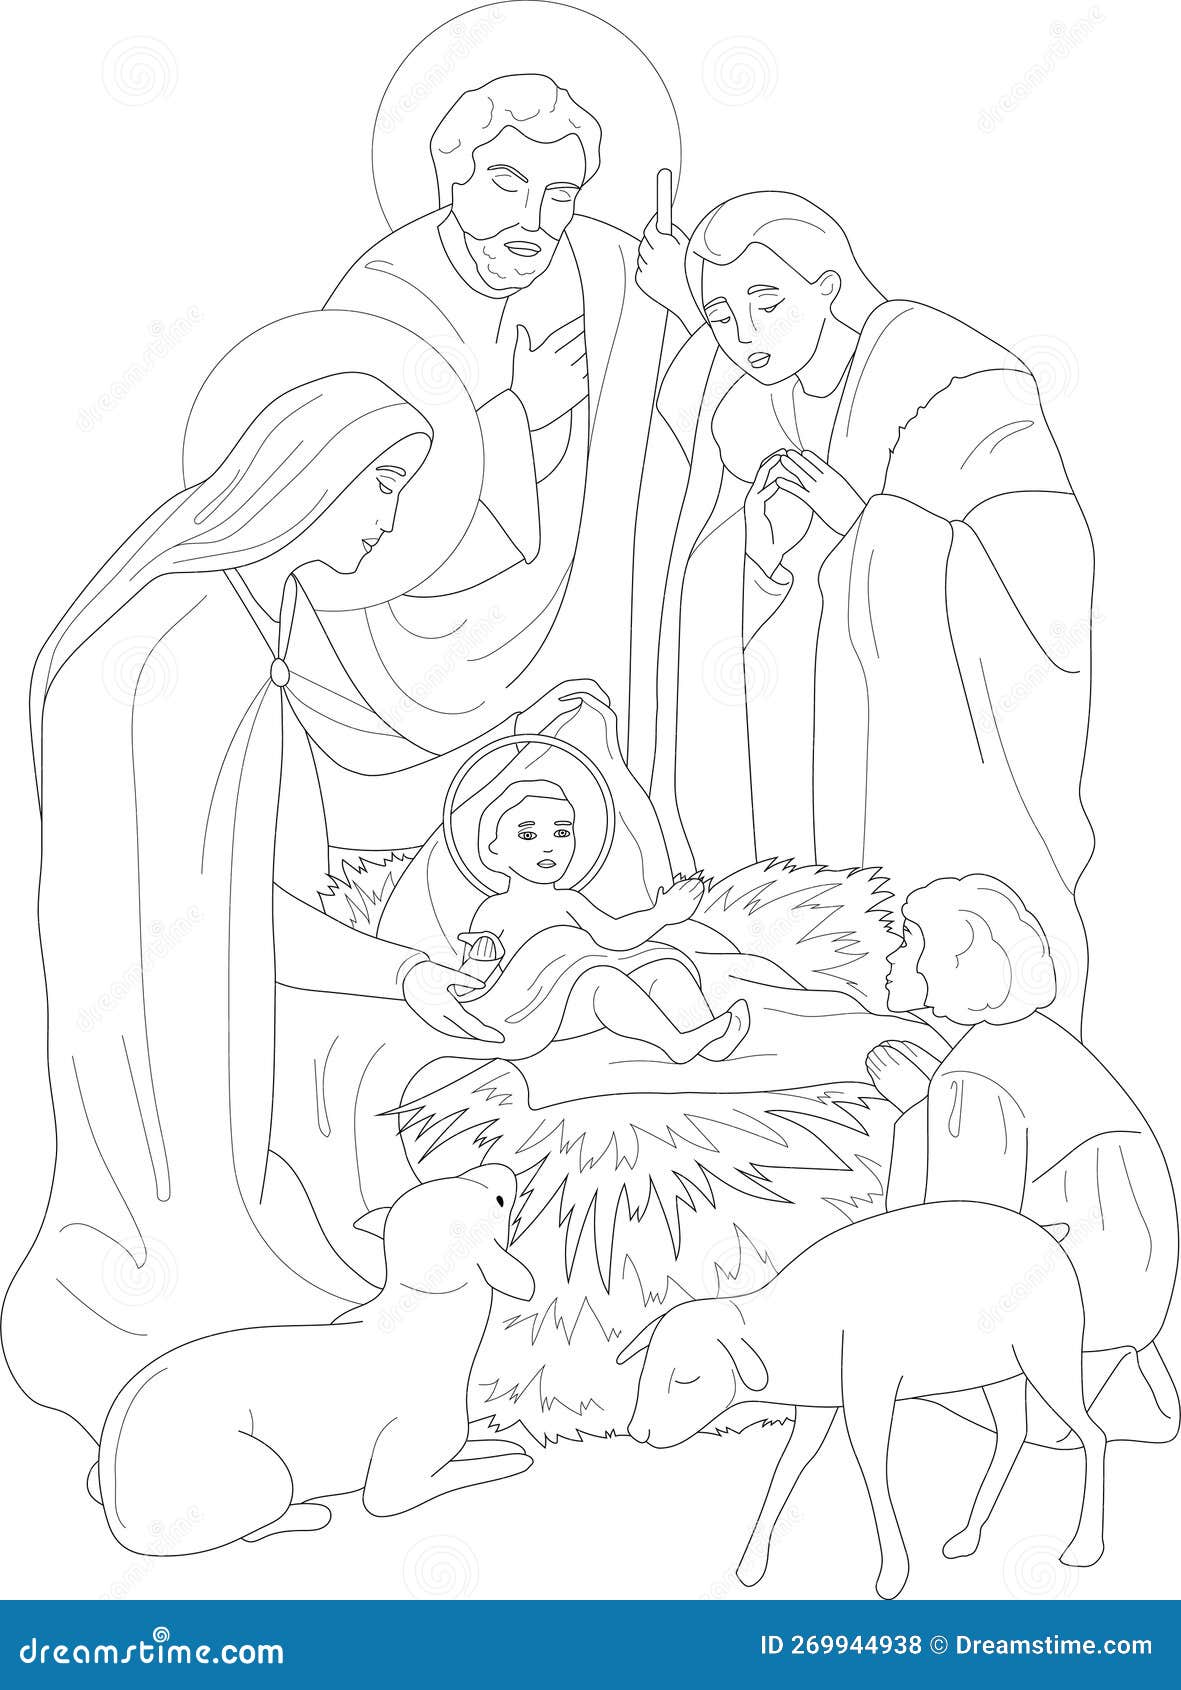 Angel Gabriel Announcing the Birth of Christ to Shepherds coloring page |  Free Printable Coloring Pages